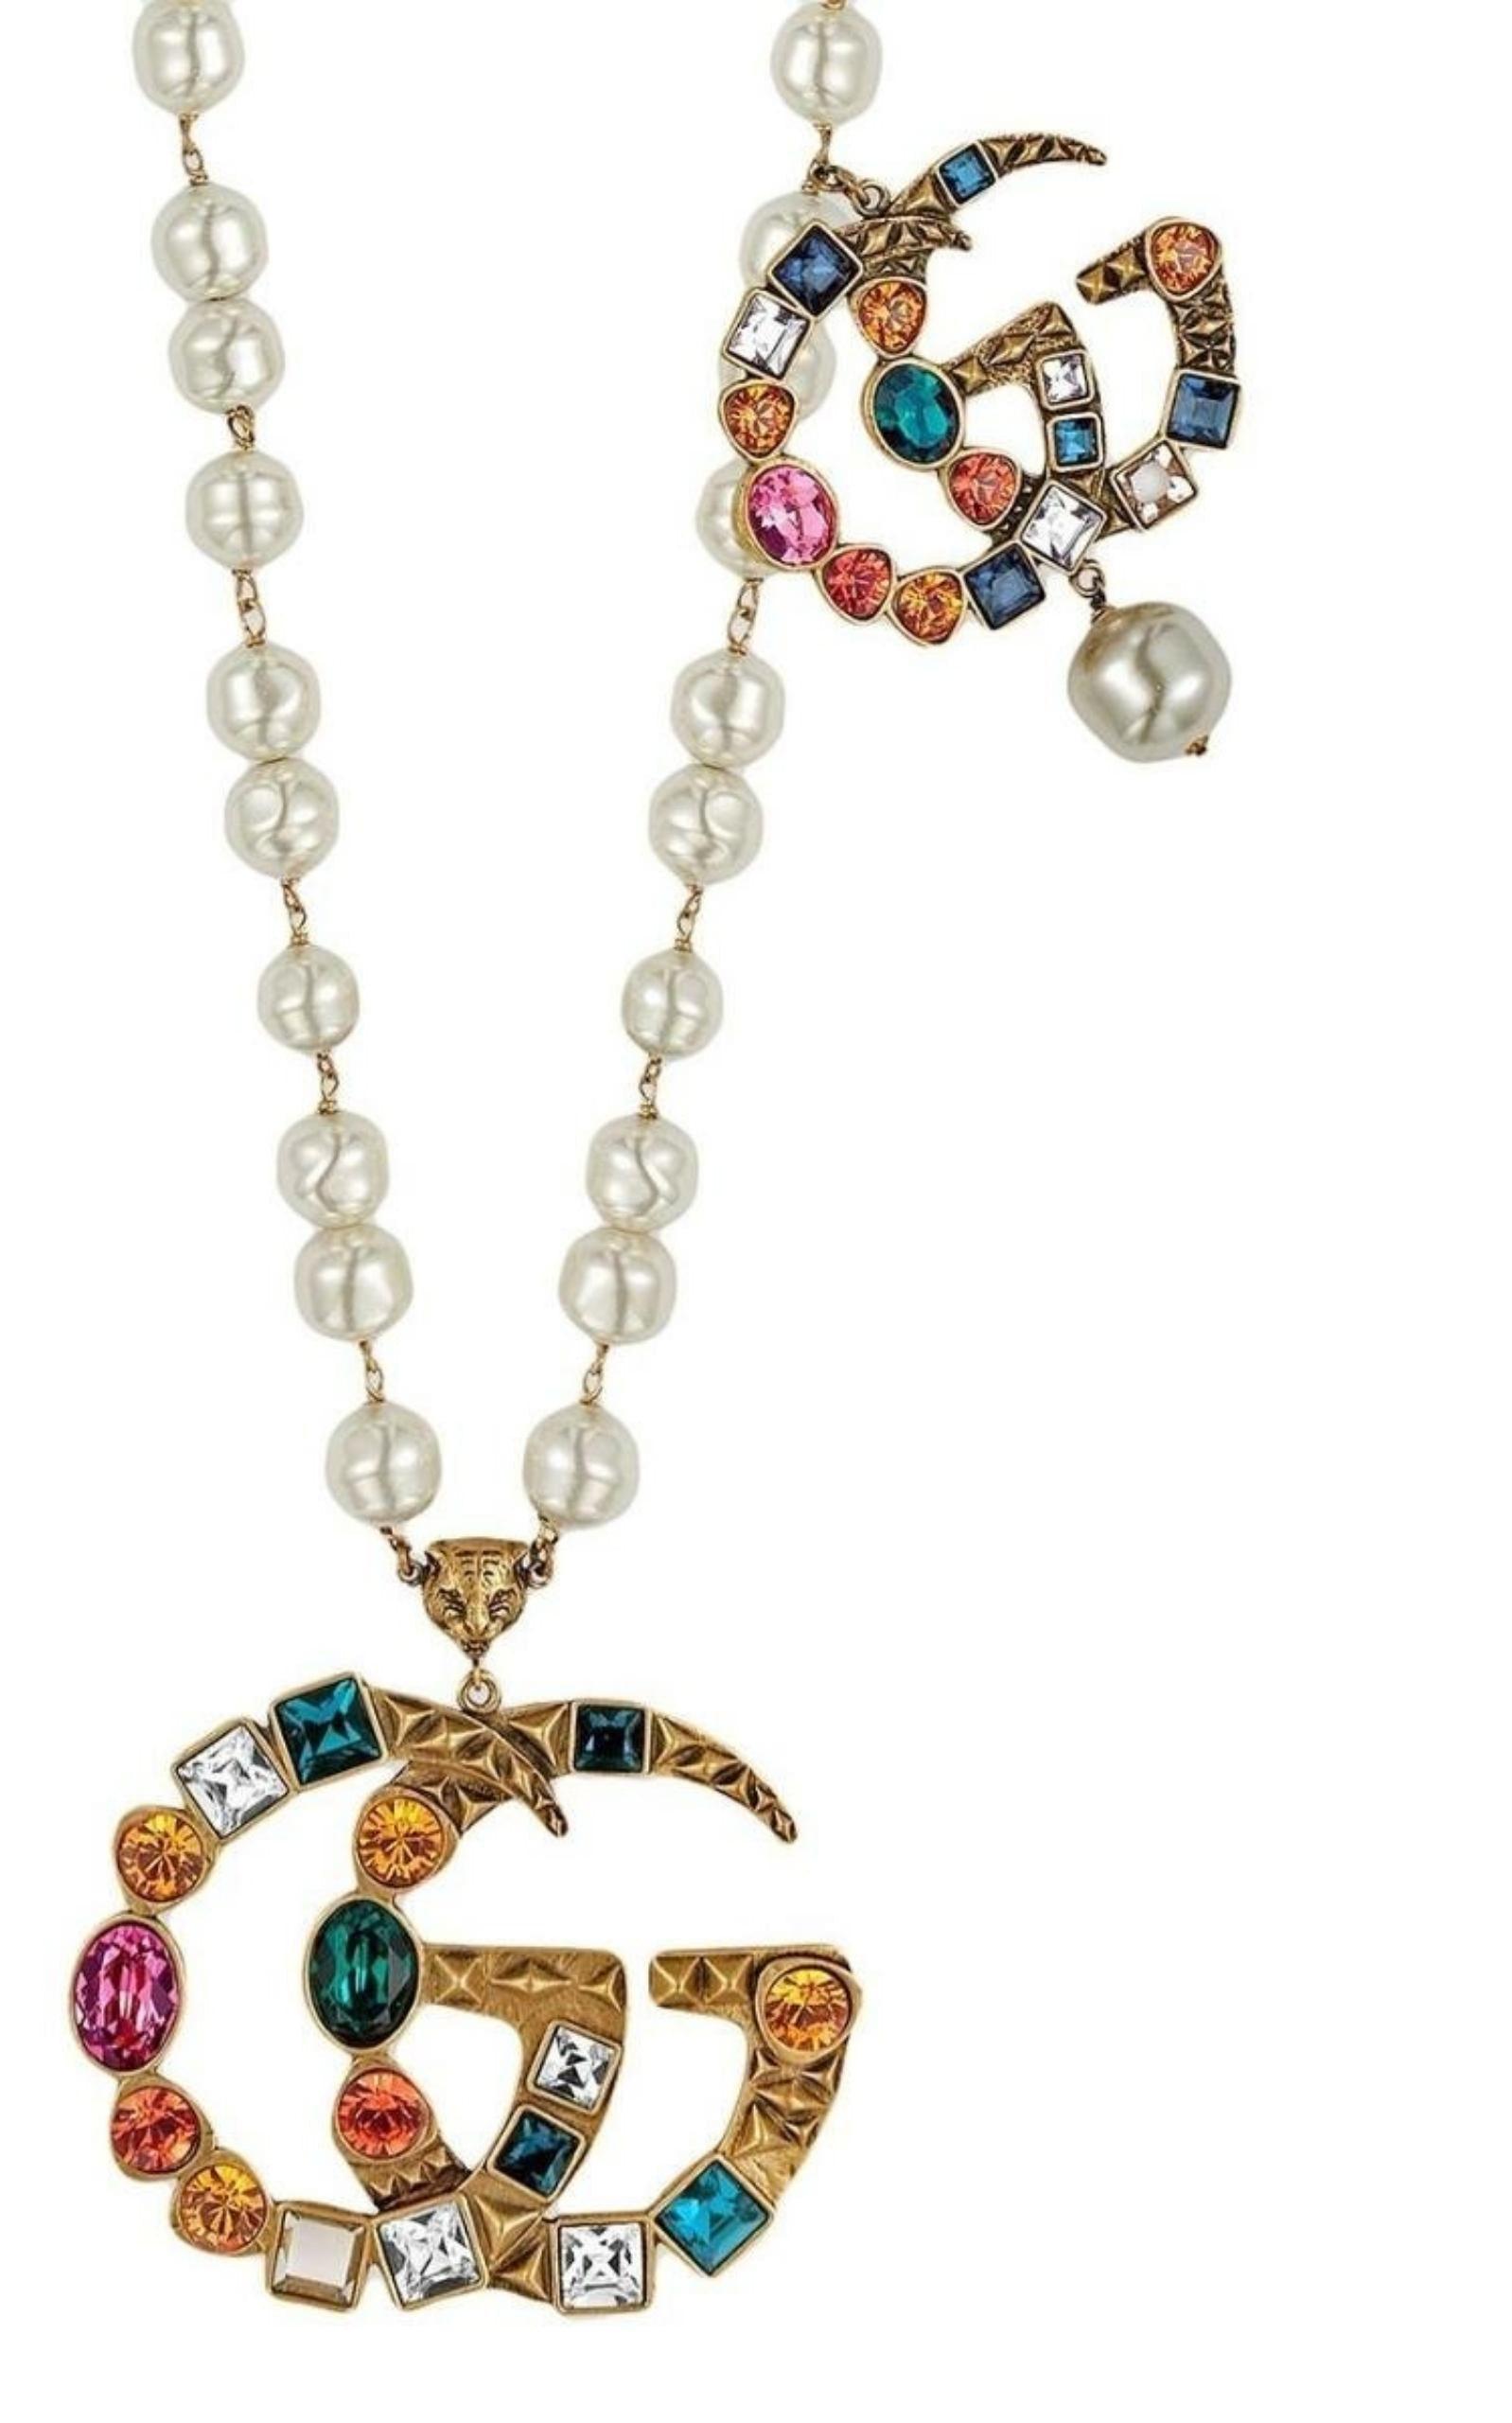  GucciGold-plated Metal Double G Crystal  Necklace - Runway Catalog